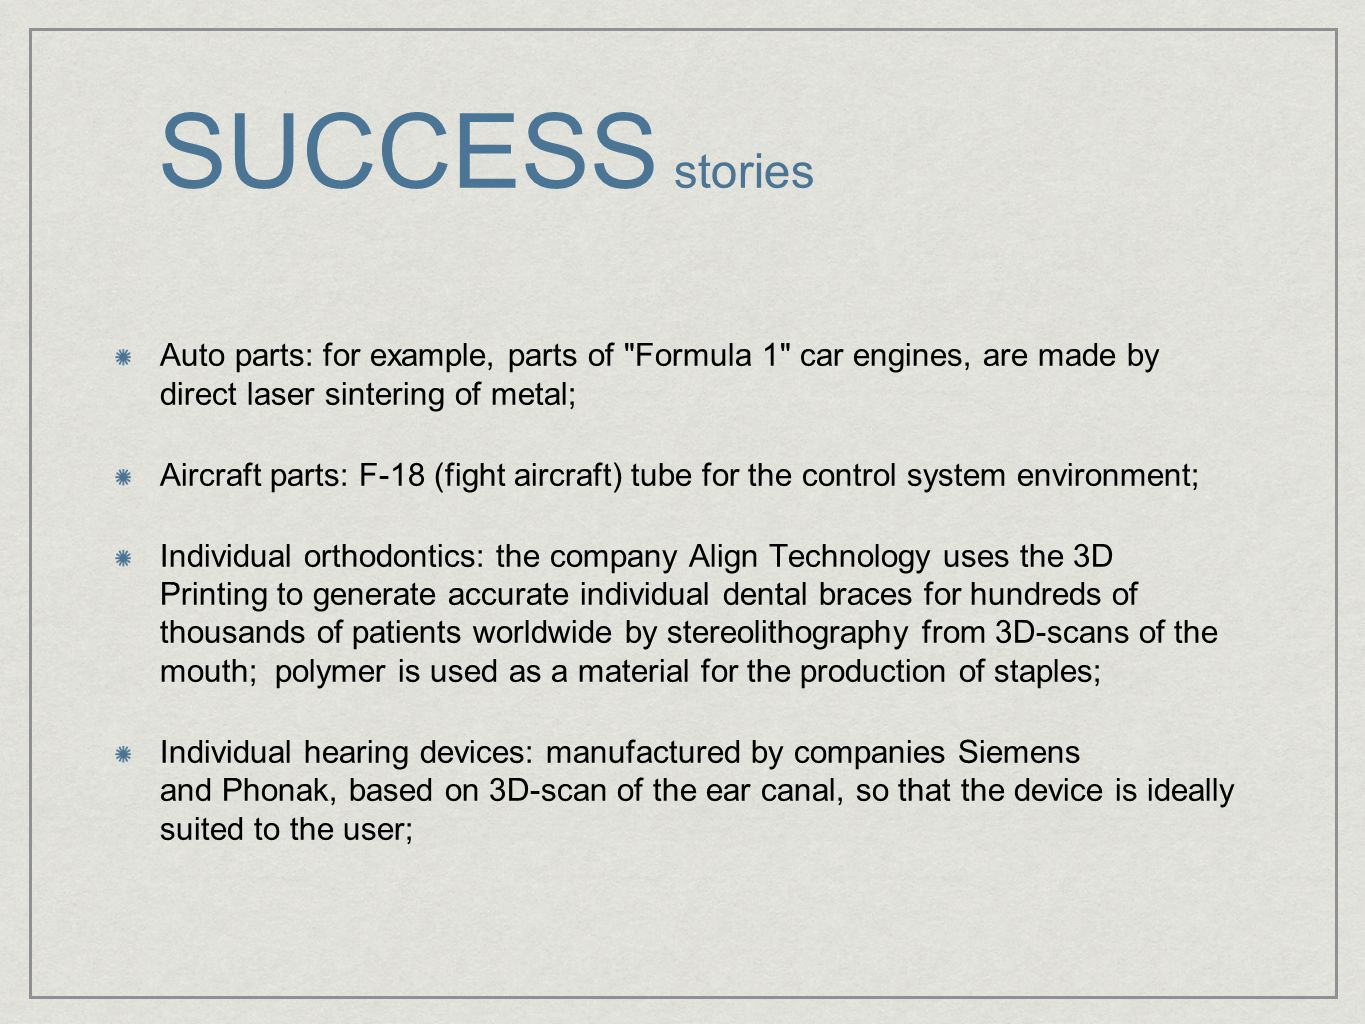 SUCCESS stories Auto parts: for example, parts of Formula 1 car engines, are made by direct laser sintering of metal; Aircraft parts: F-18 (fight aircraft) tube for the control system environment; Individual orthodontics: the company Align Technology uses the 3D Printing to generate accurate individual dental braces for hundreds of thousands of patients worldwide by stereolithography from 3D-scans of the mouth; polymer is used as a material for the production of staples; Individual hearing devices: manufactured by companies Siemens and Phonak, based on 3D-scan of the ear canal, so that the device is ideally suited to the user;